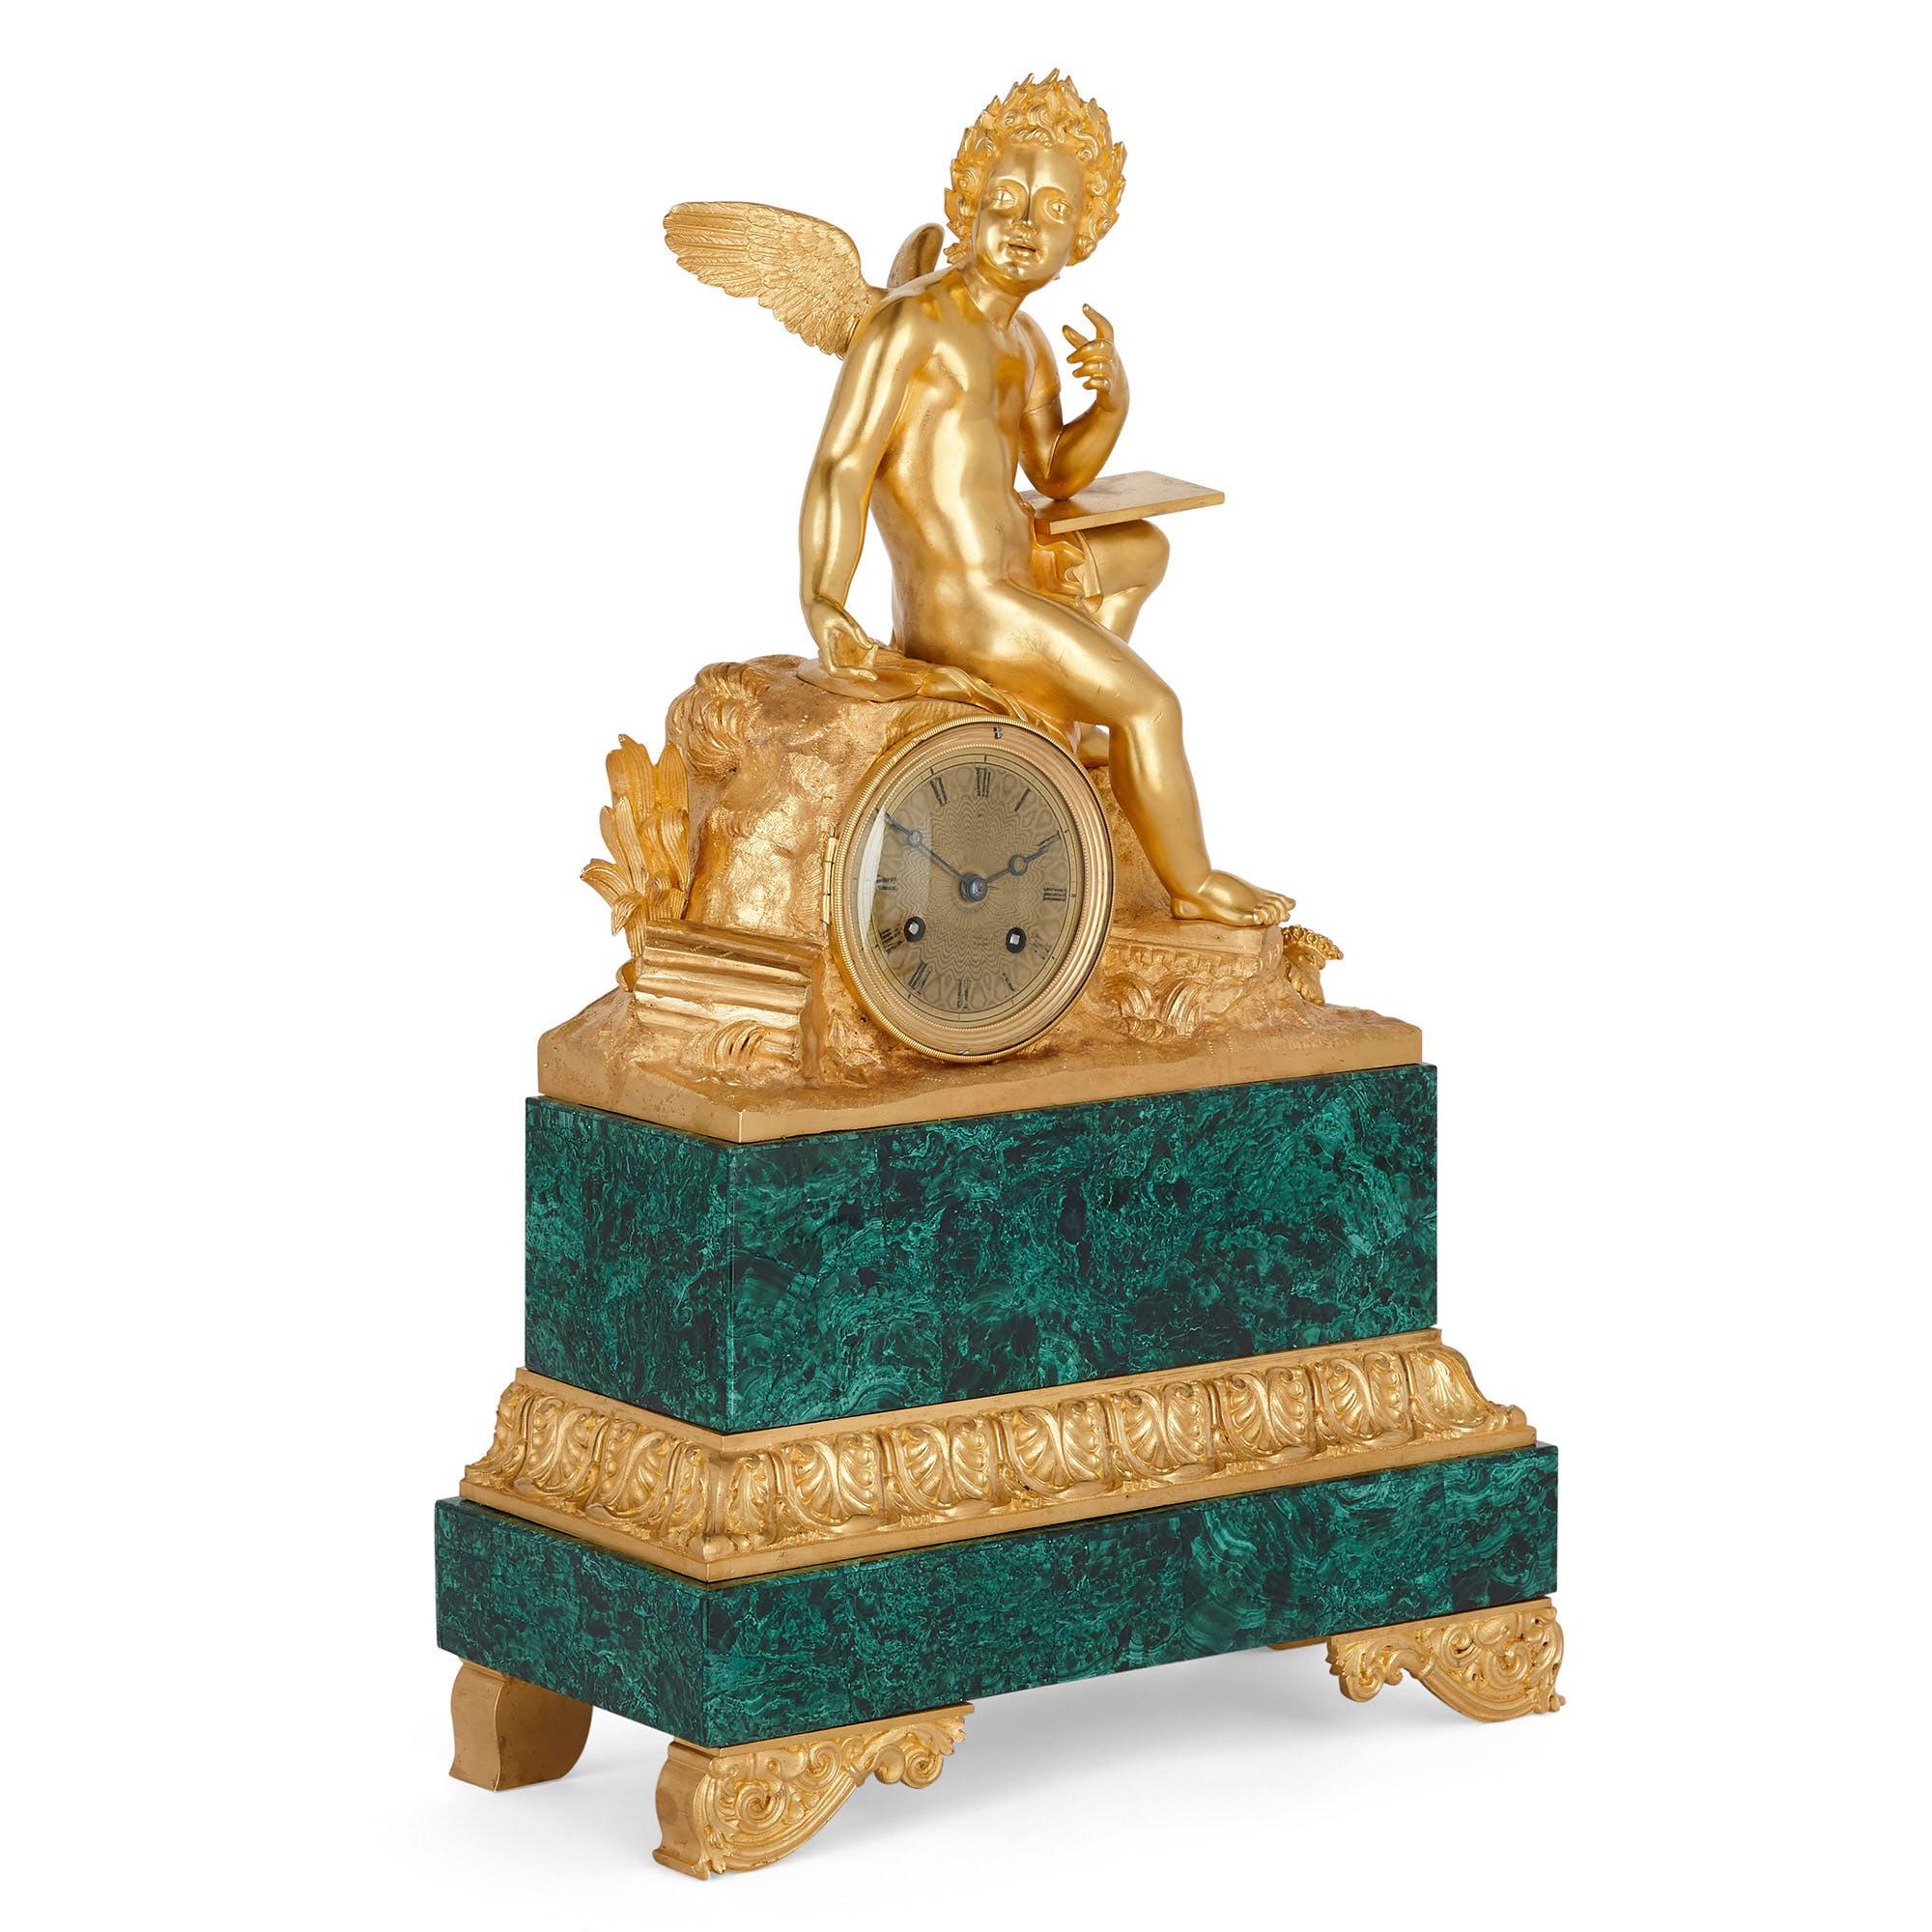 French neoclassical malachite and gilt bronze mantel clock
French, circa 1830
Measures: Height 51cm, width 33cm, depth 14cm

This mantel clock is a fine example of the Charles X style. The clock, wrought from malachite and gilt bronze, features